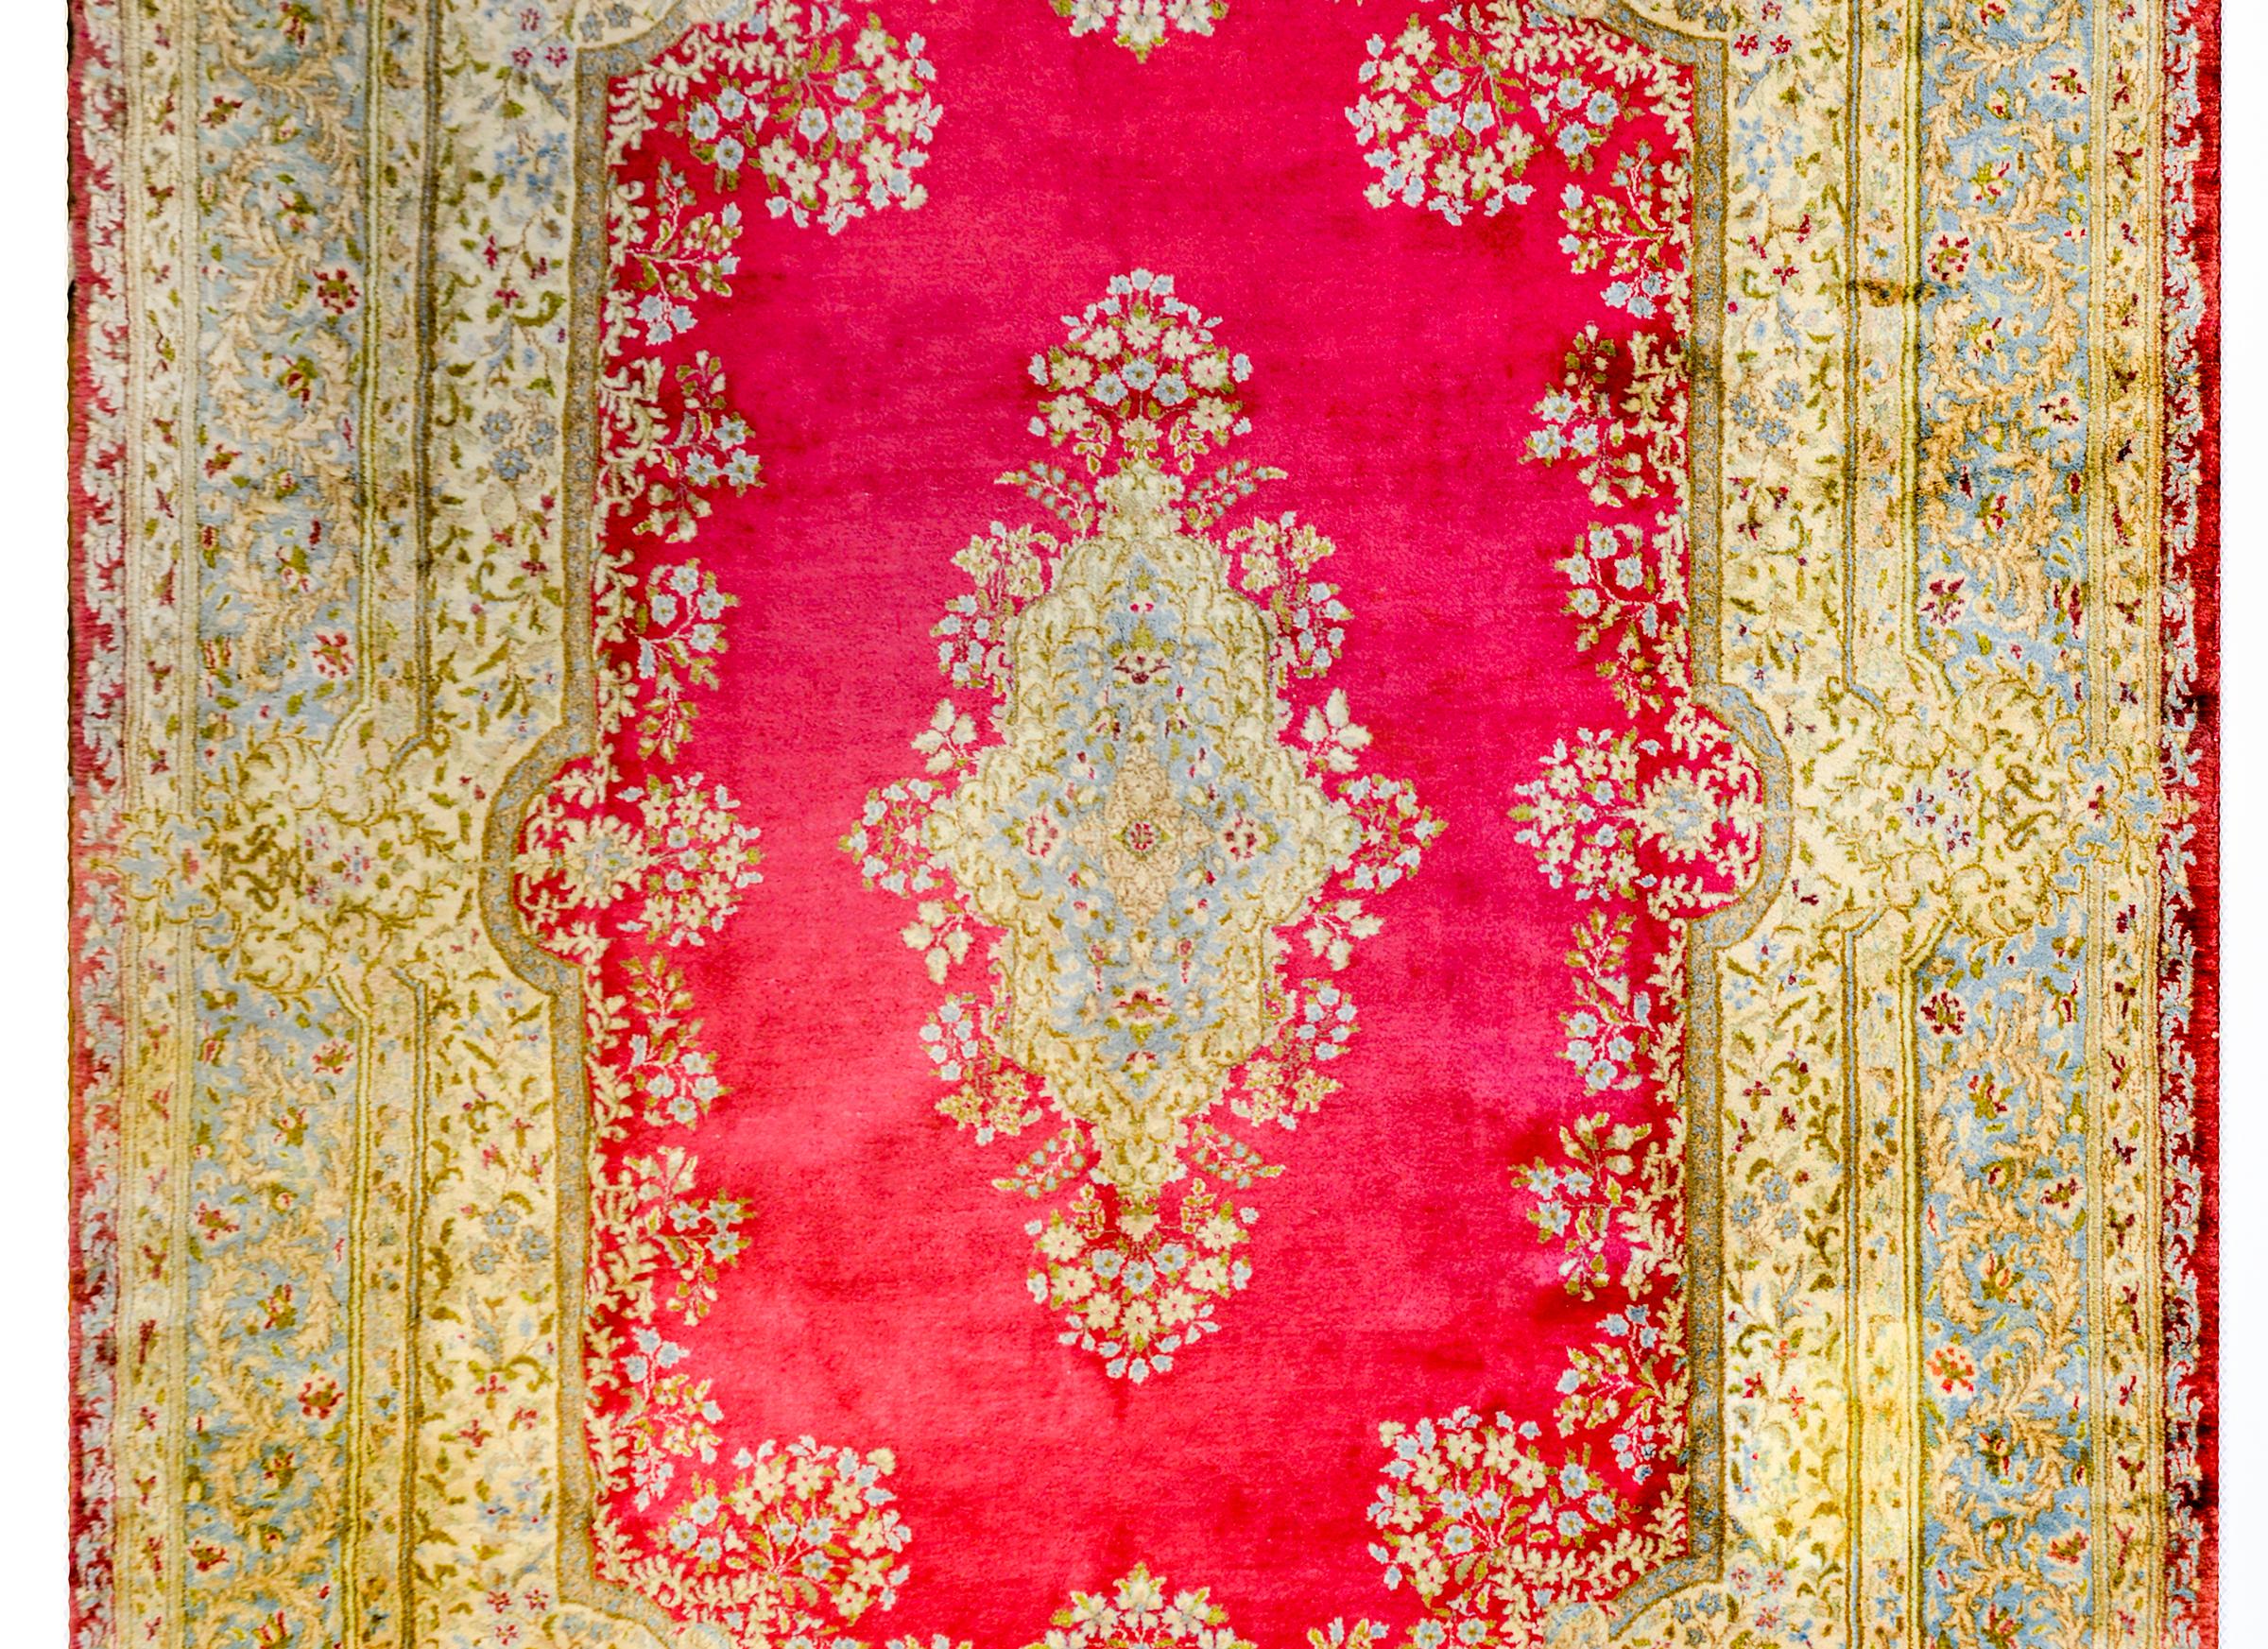 A circa 1950 Persian Kirman rug with a large central floral medallion with myriad flowers and vines woven in taupe, green, pale blue, on a bold cranberry colored background. The border is wide and of a matching pattern and colors as the medallion.